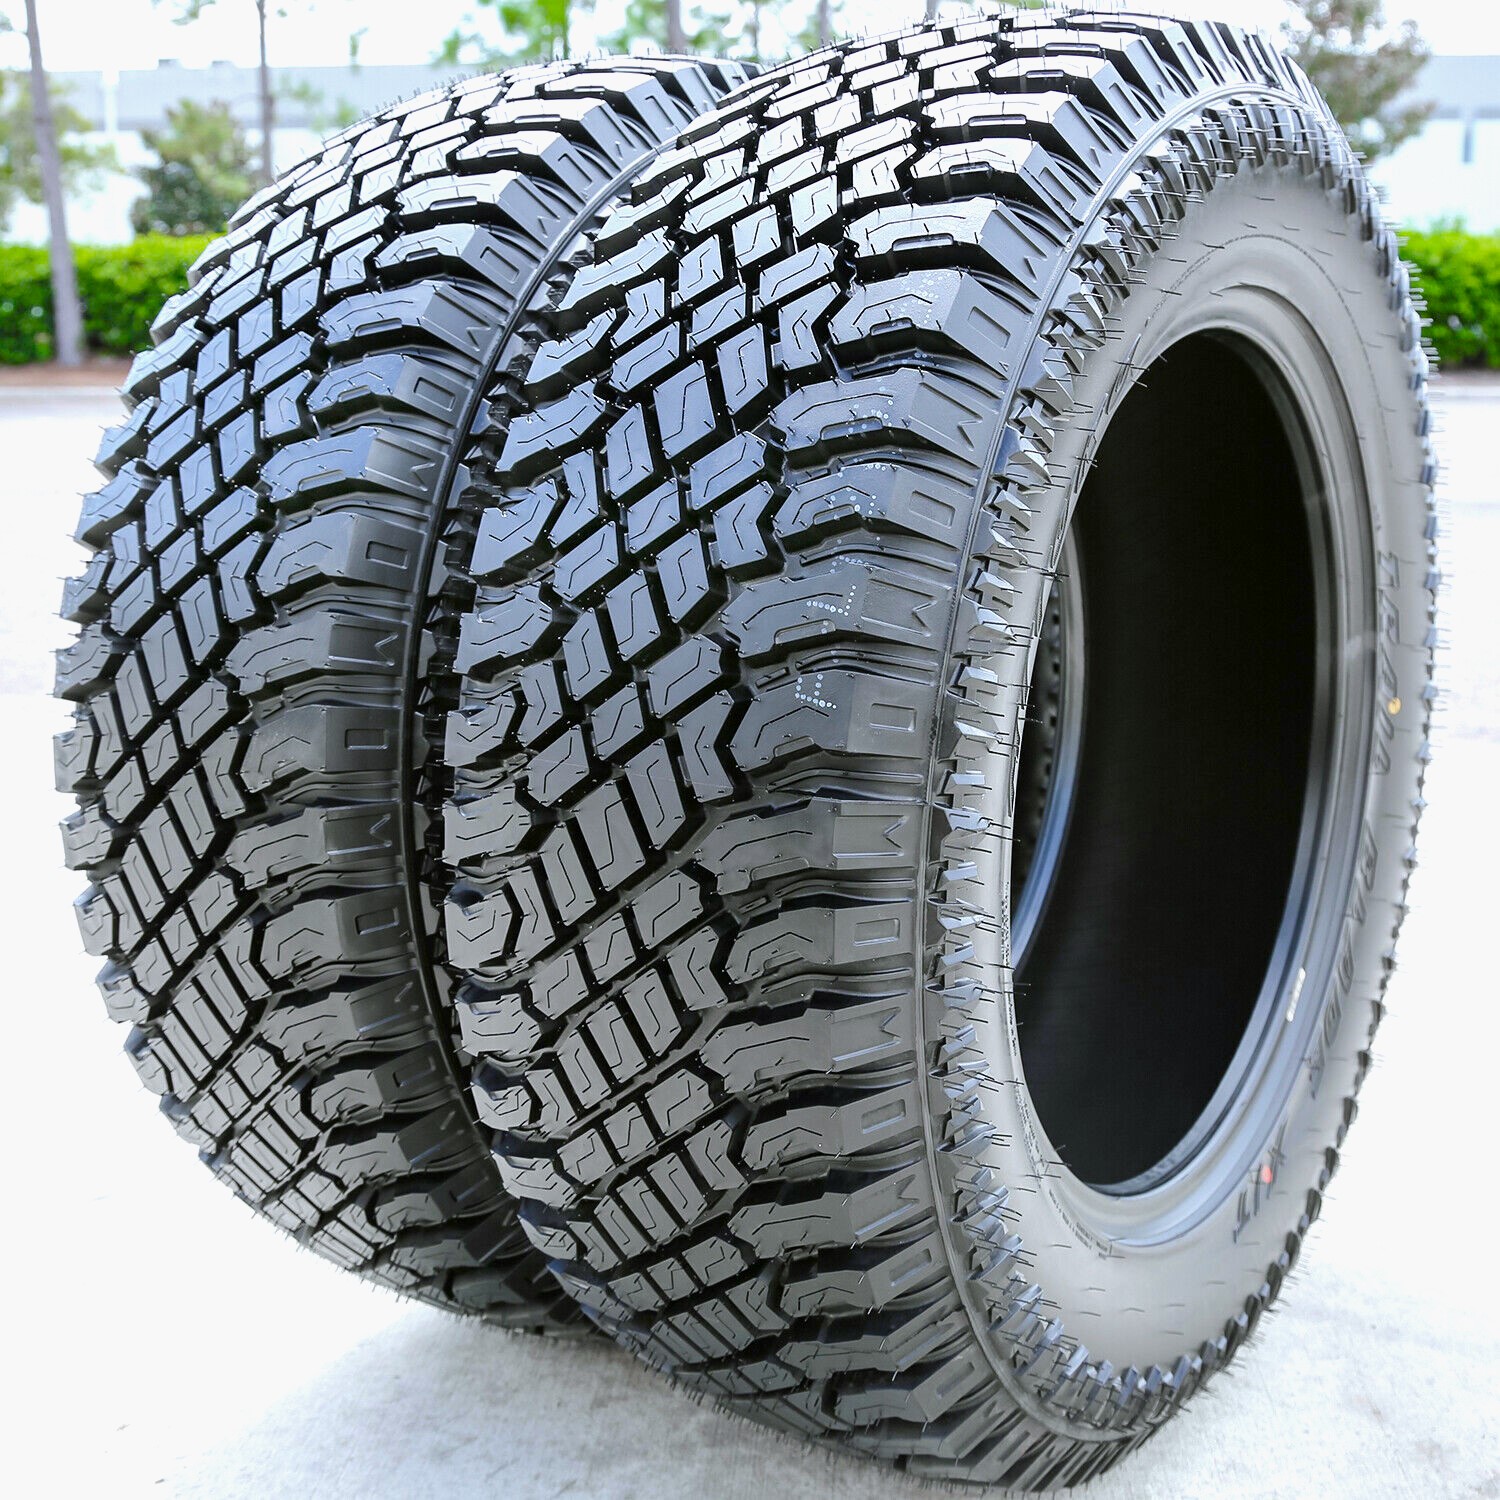 Set of 4 (FOUR) Atturo Trail Blade X/T 275/45R22 112H XL AT A/T All Terrain Tires Fits: 2021 Land Rover Defender 90 X-Dynamic S - image 5 of 10